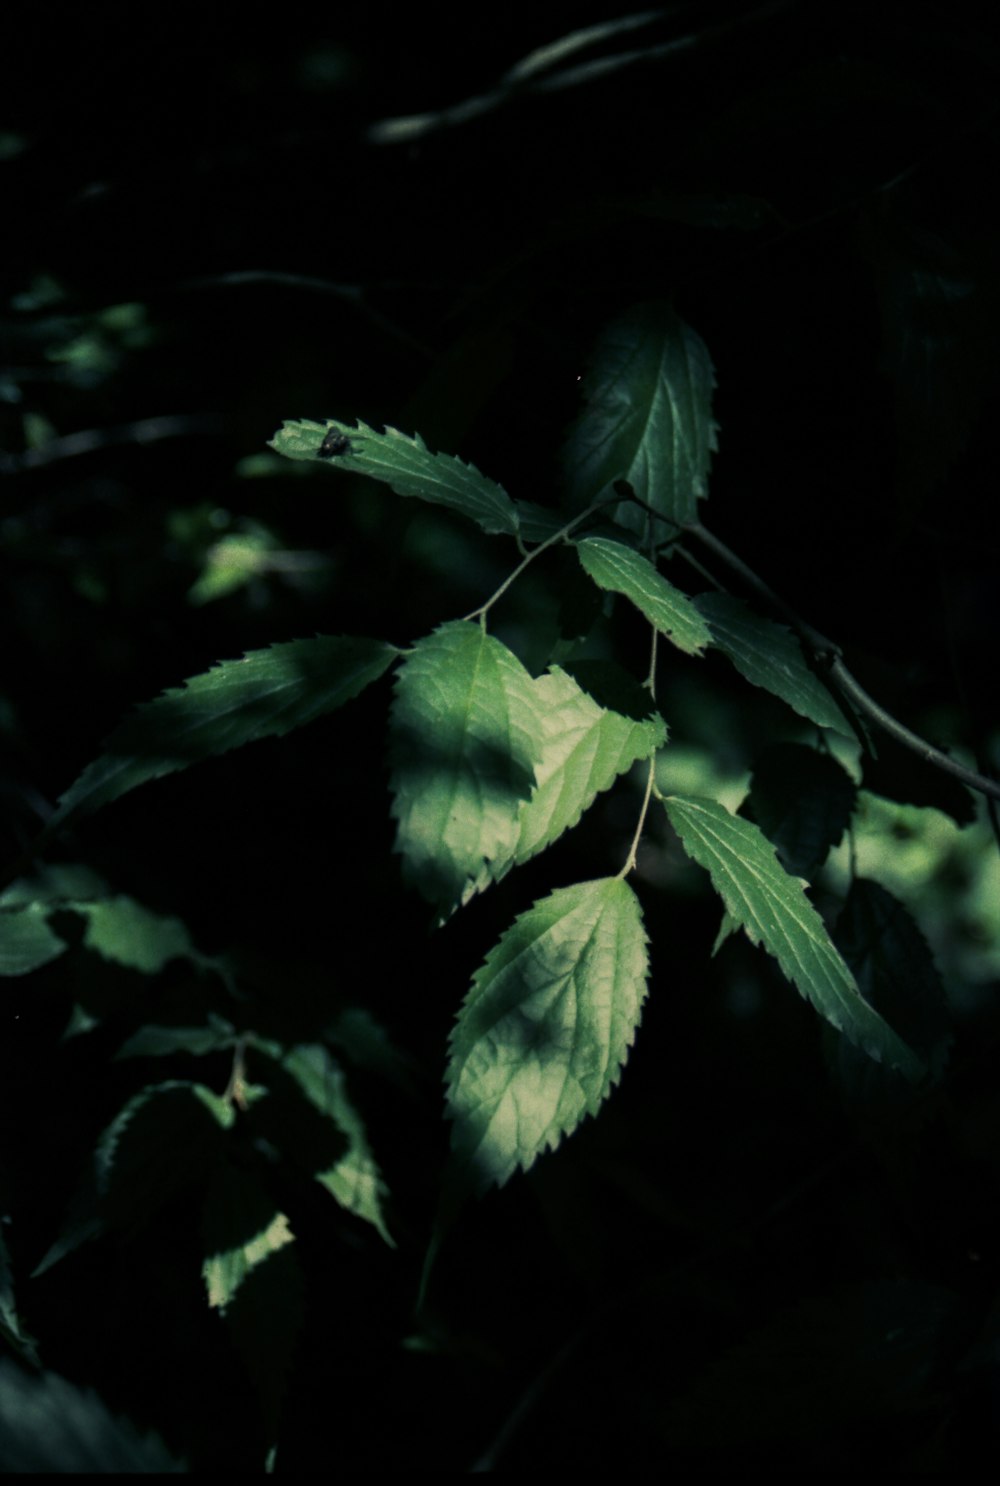 green leaves in close up photography